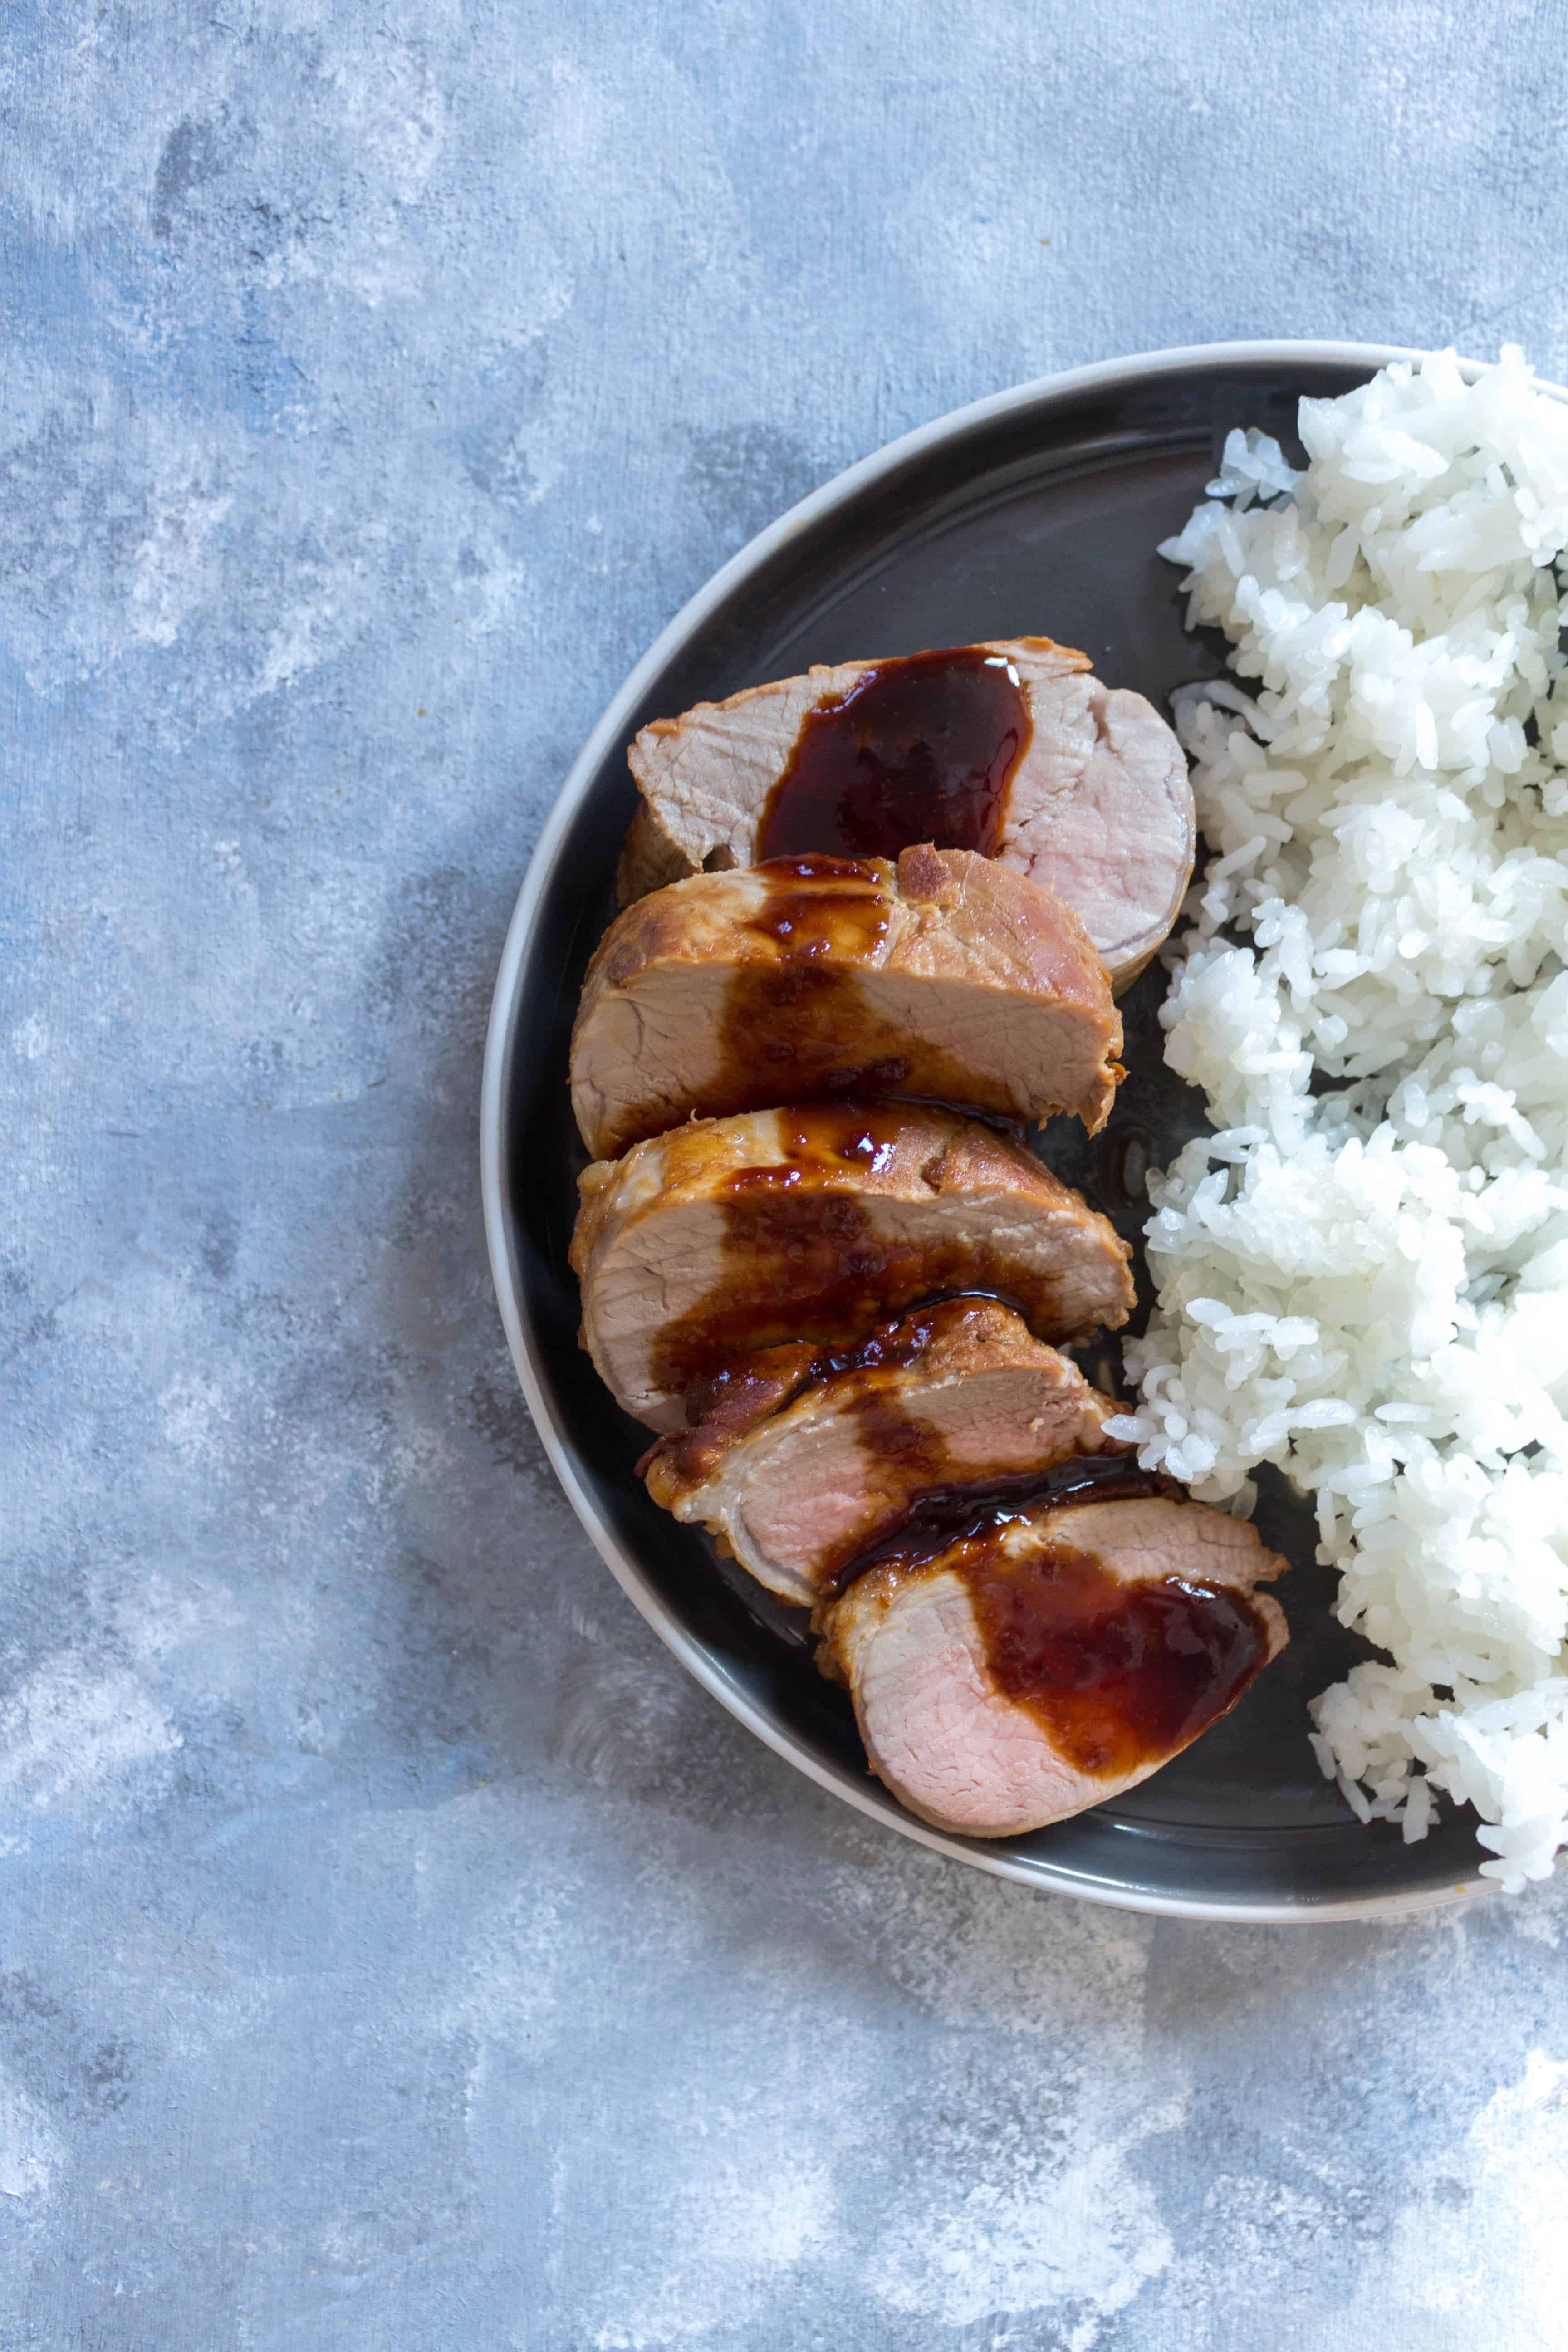 This super easy Instant Pot Teriyaki Pork Tenderloin only takes 7 minutes! This pork tenderloin is tender and coated in a delicious teriyaki sauce that is made inside the Instant Pot too! (Stovetop + Oven instructions at the bottom too if you don't have an IP) #InstantPot #InstantPotRecipe #PorkTenderloinRecipe #TeriyakiRecipe #TeriyakiSauce